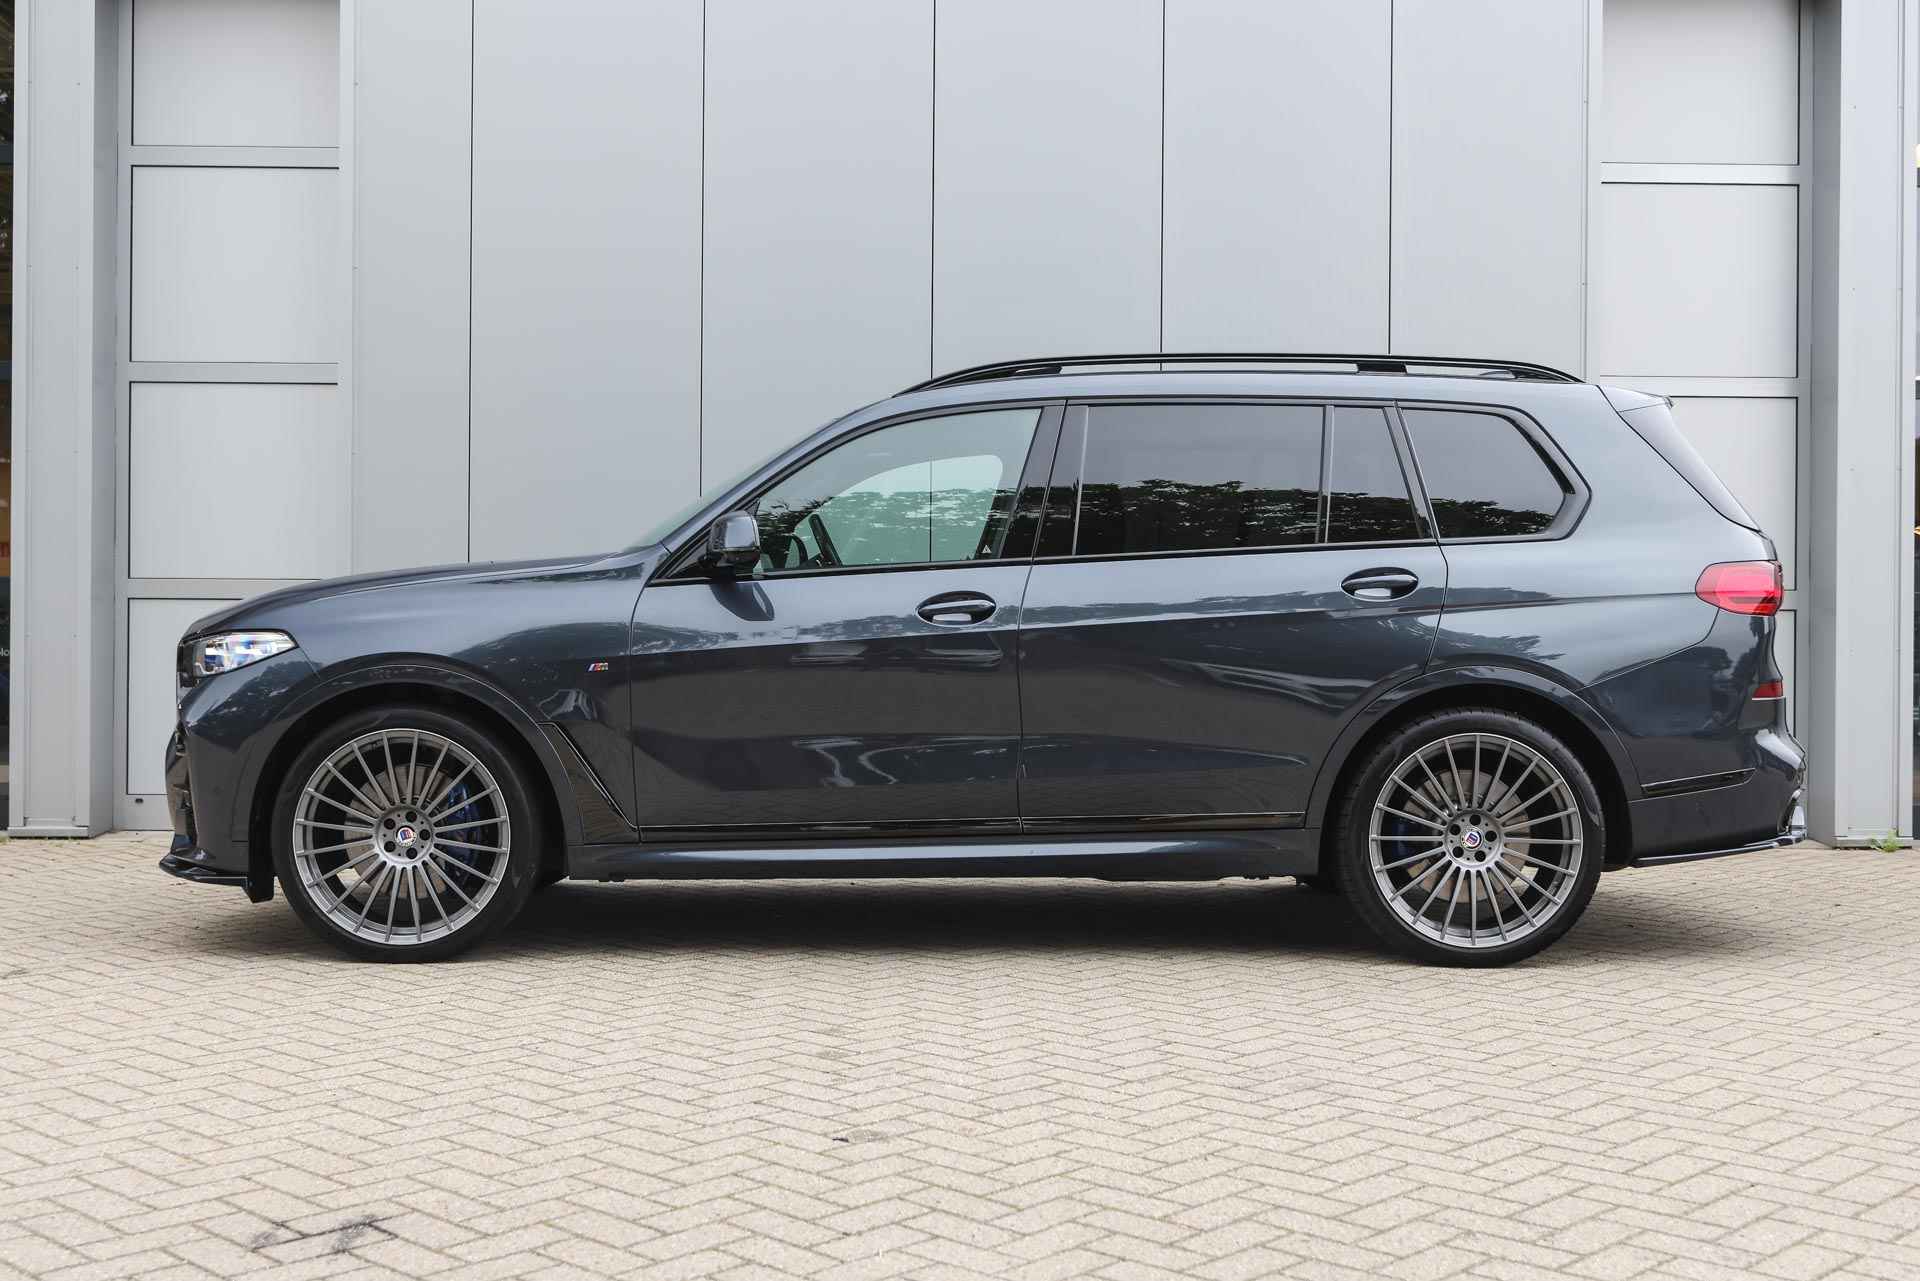 BMW X7 M50i High Executive Automaat / Active Steering / Stoelventilatie / Laserlight / Soft Close / Head-Up / Gesture Control / Parking Assistant Plus / Alpina wielen 23 inch - 9/56